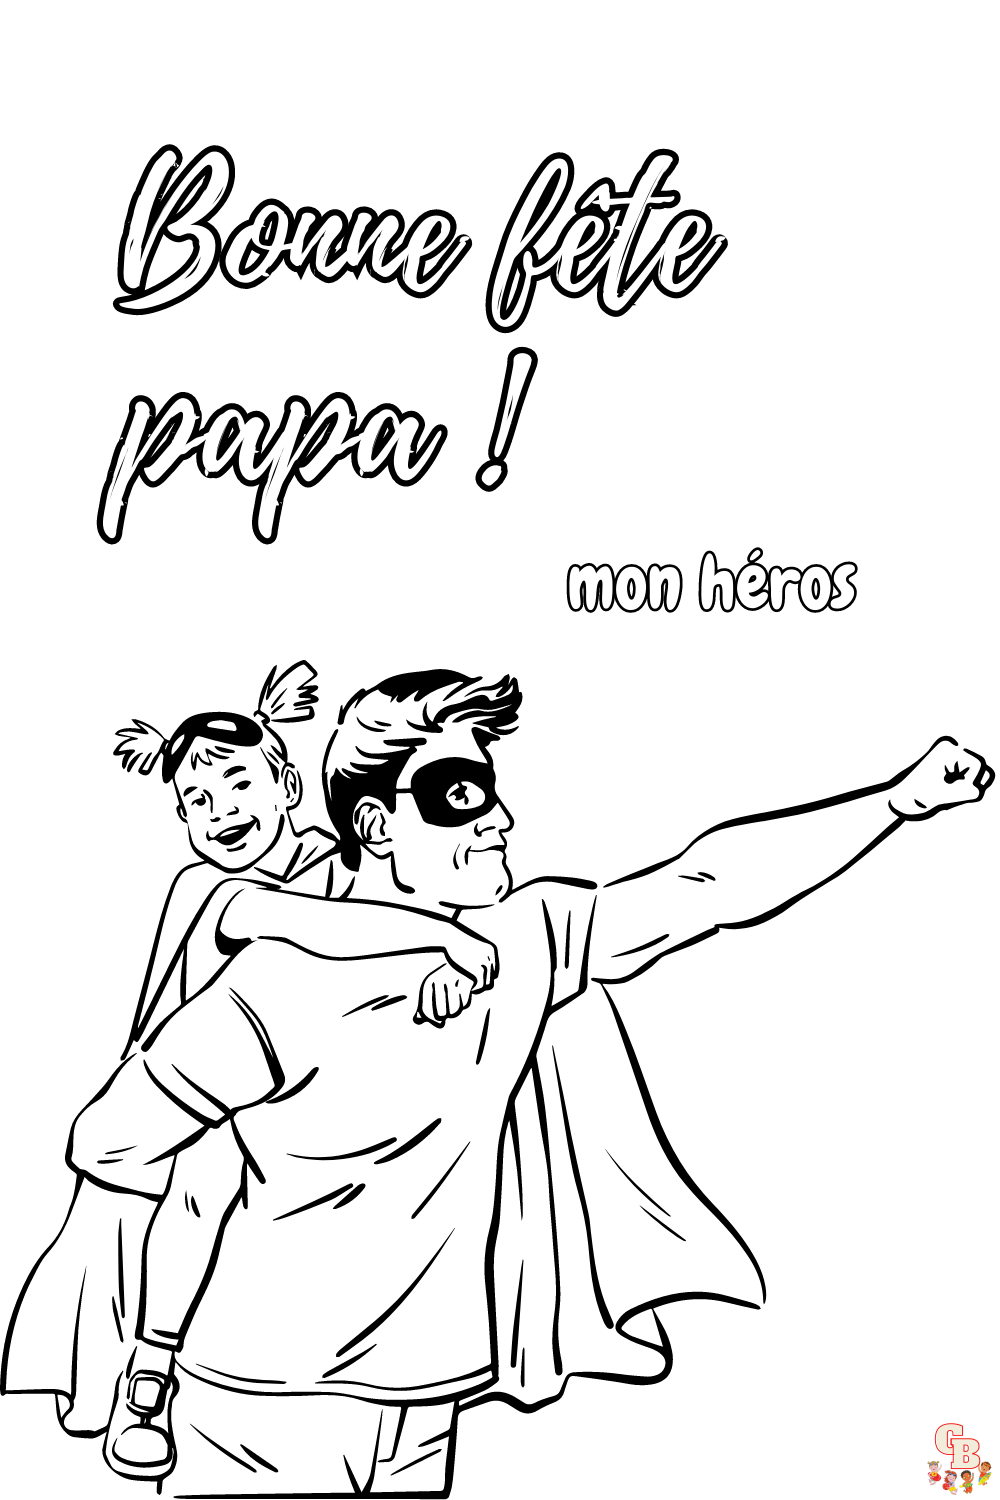 Coloring ideas for Father's Day in French Free colorings, cards, poems, gifts and DIY